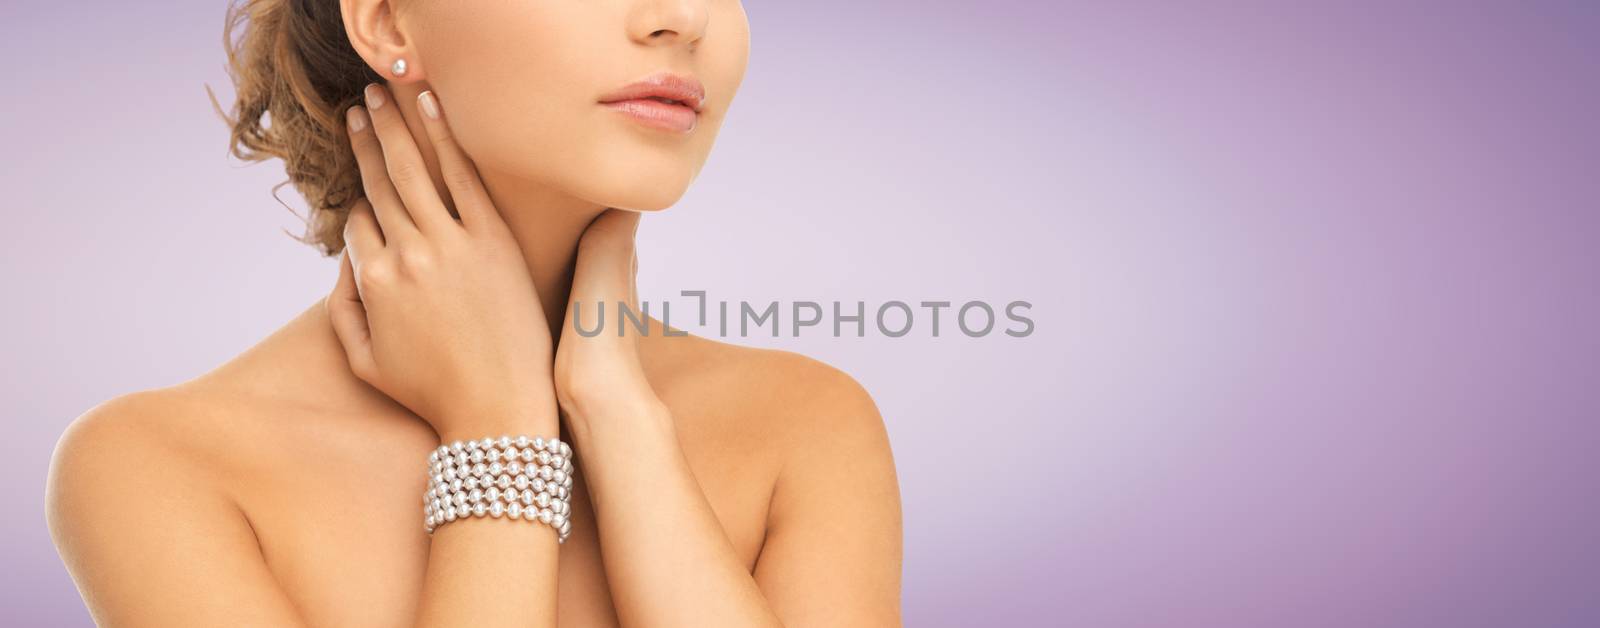 beautiful woman with pearl earrings and bracelet by dolgachov